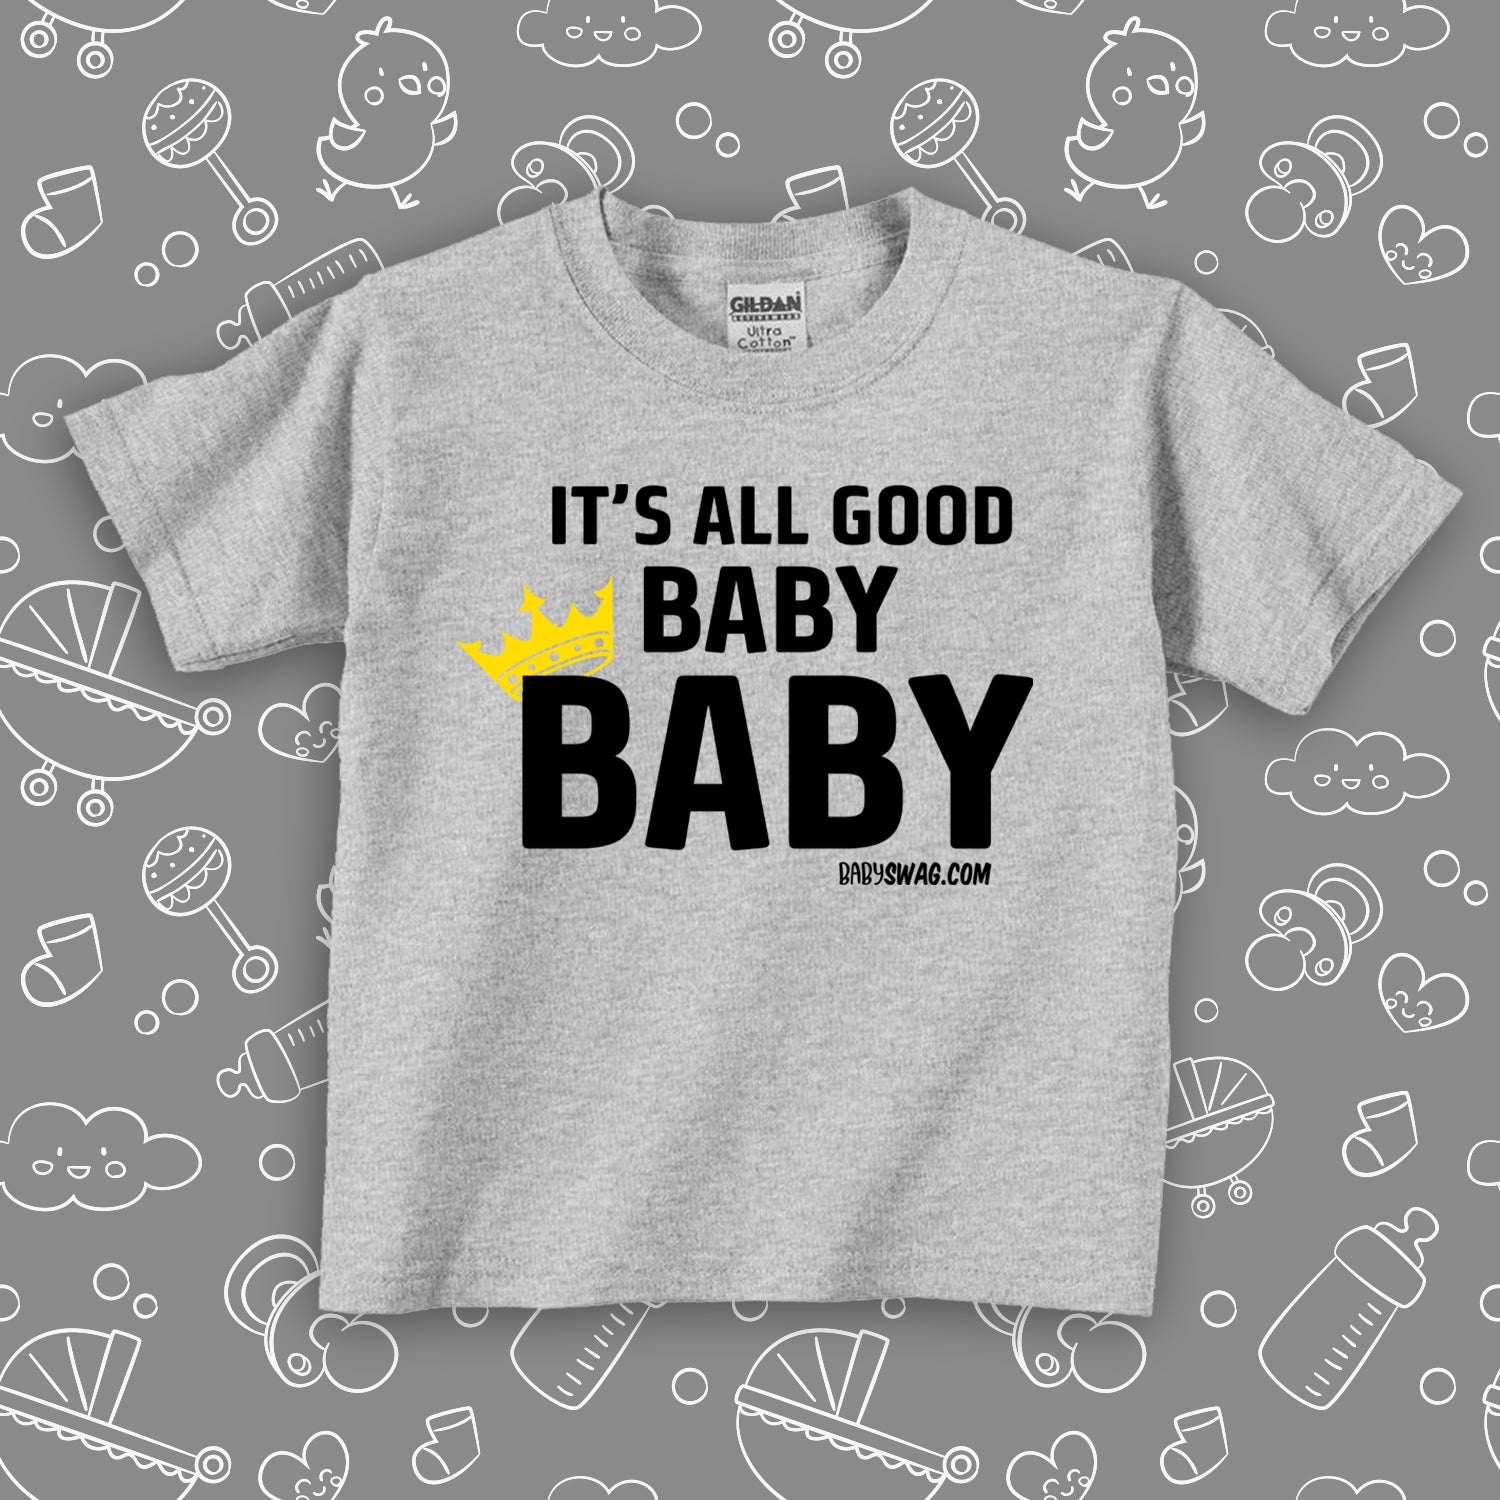 The "It's All Good Baby" cool toddler shirt in grey. 